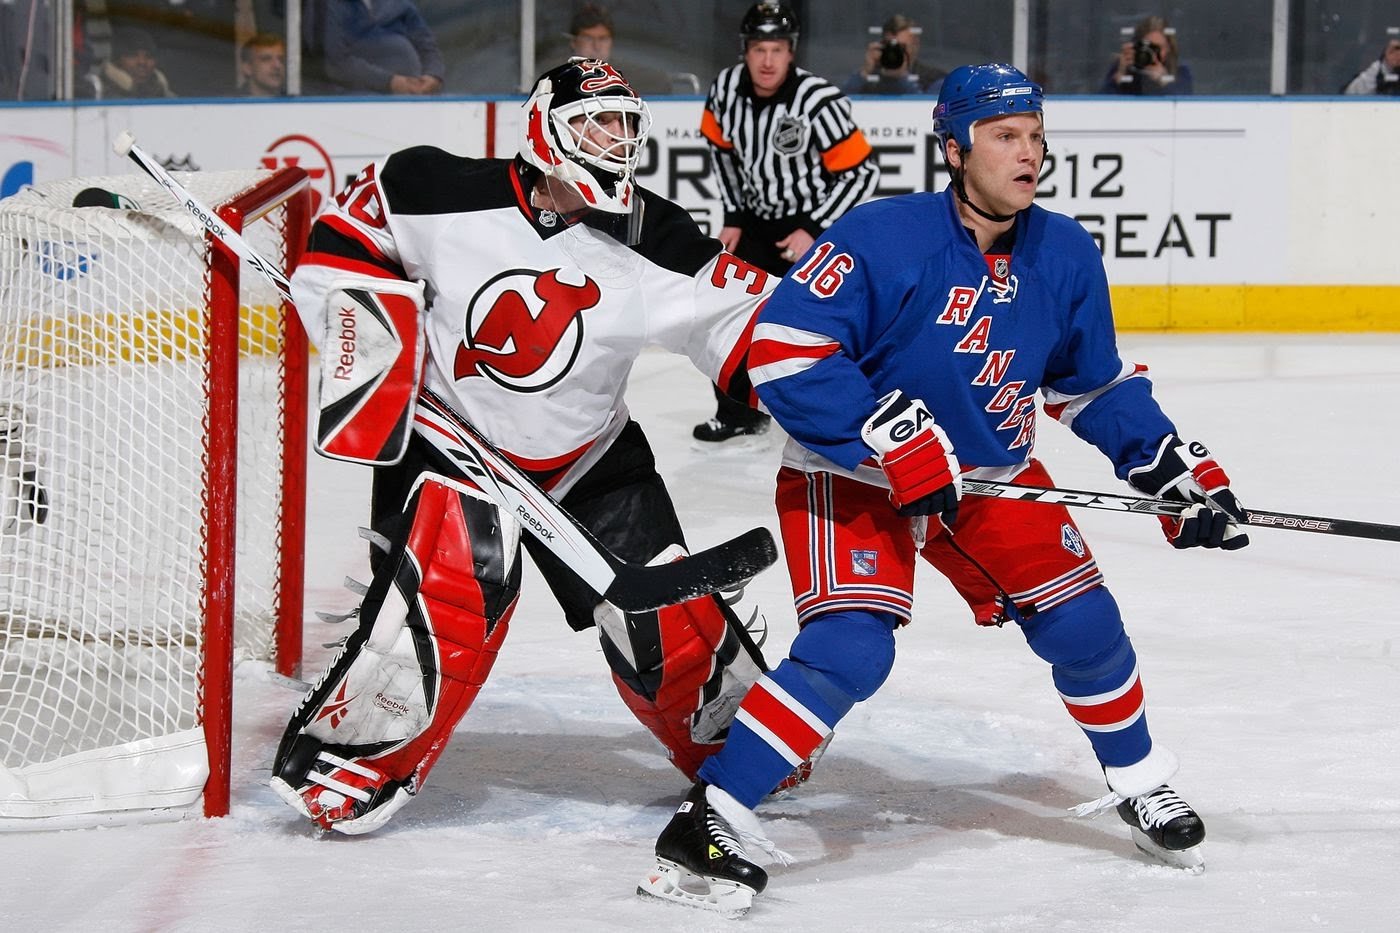 Why is Sean Avery the most hated NHL player? — nhl on Scorum